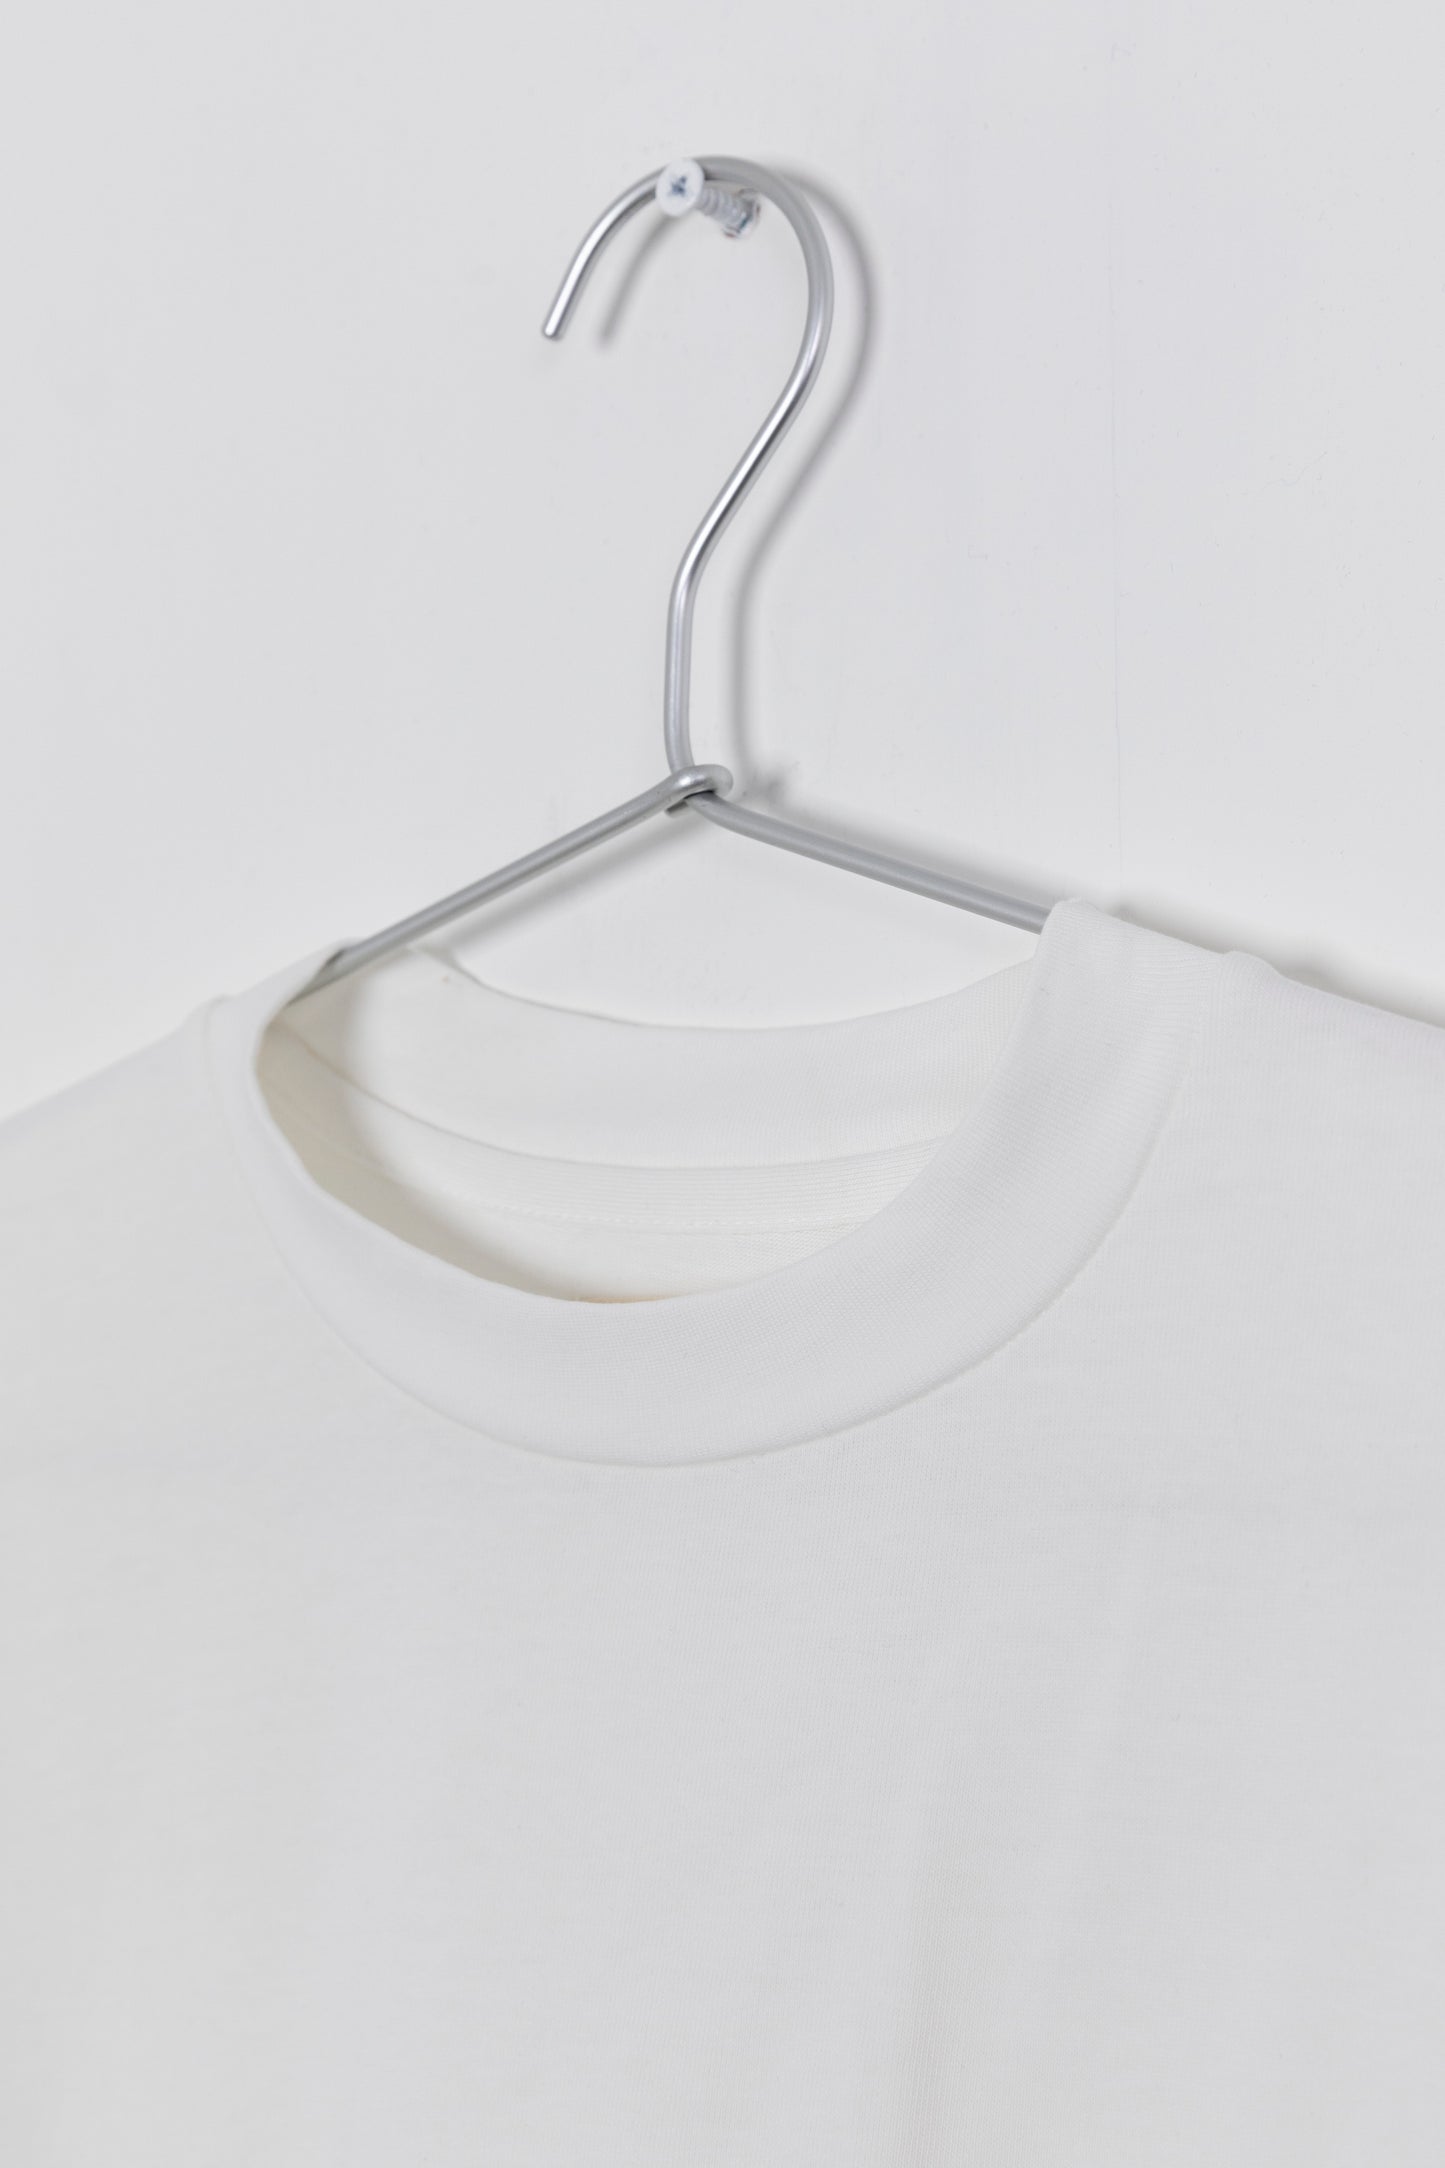 By R AW20 L/S Curve Pocket Tee